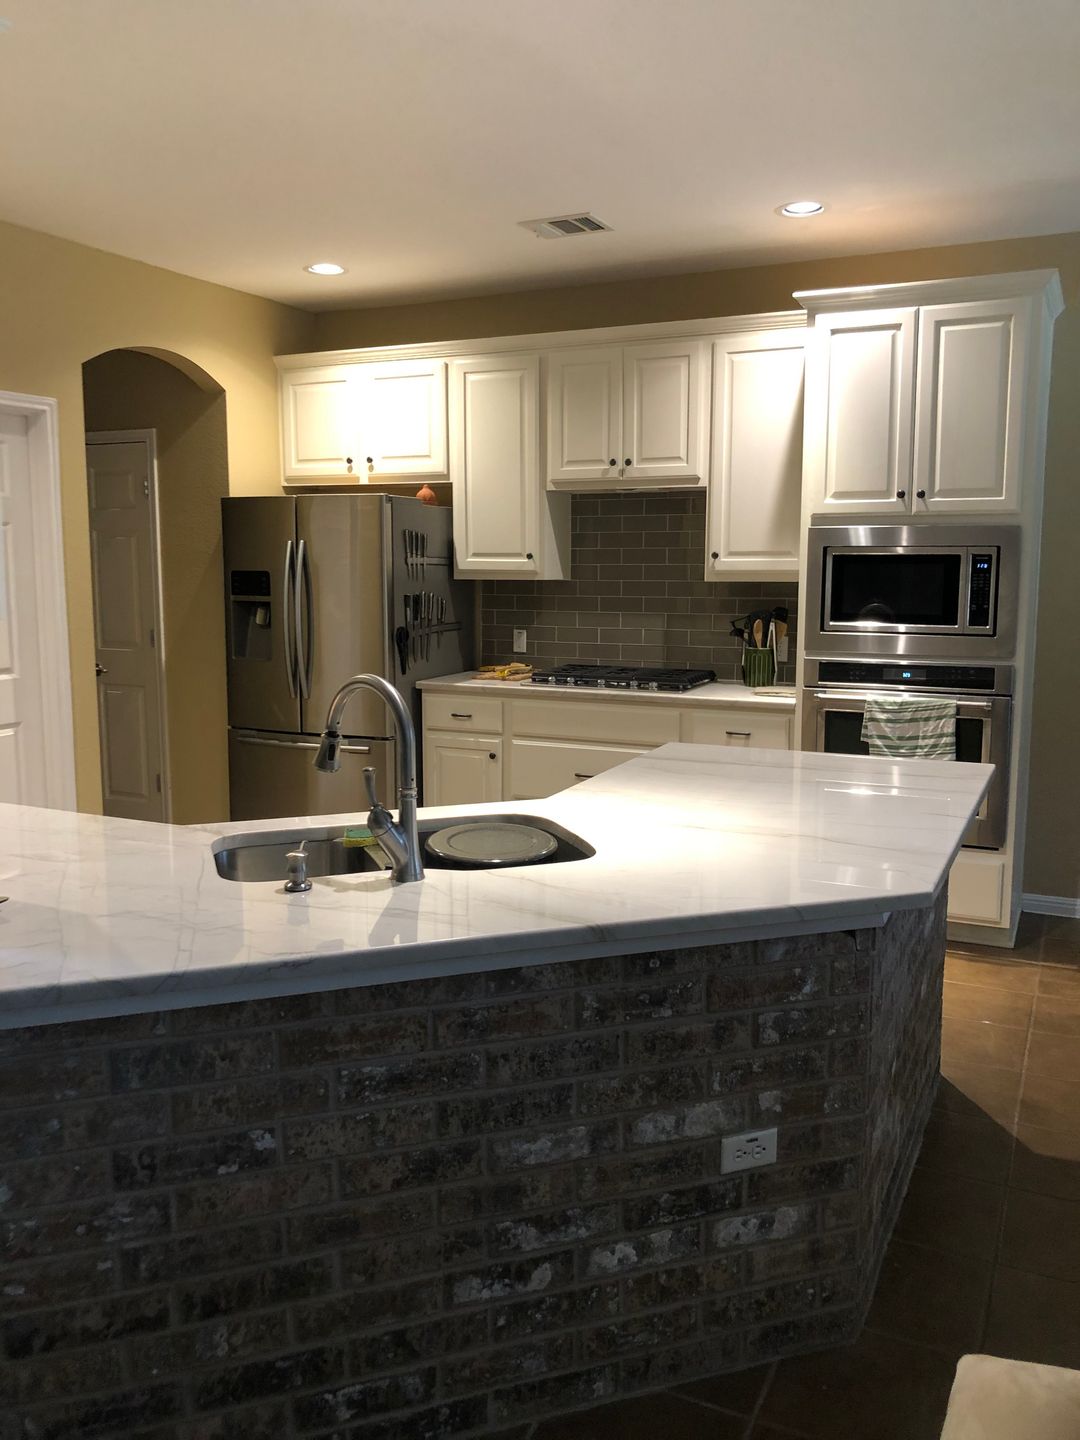 A kitchen with white cabinets and a brick counter top